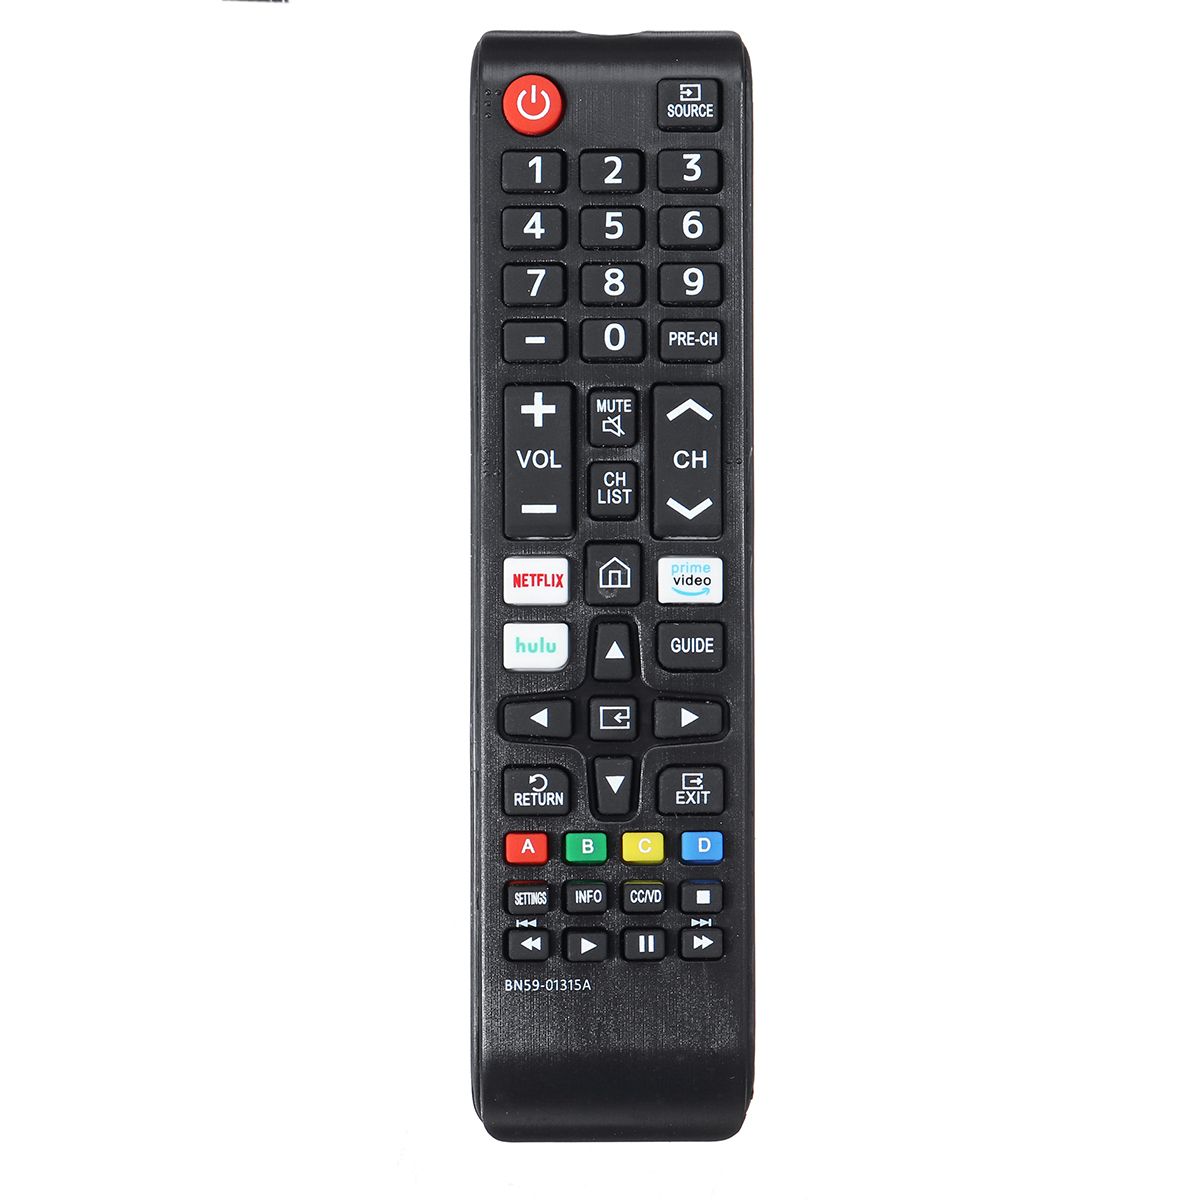 Replacement-Remote-Control-Fits-for-Samsung-Smart-TV-HDTV-BN59-01315A-NZ-1680753